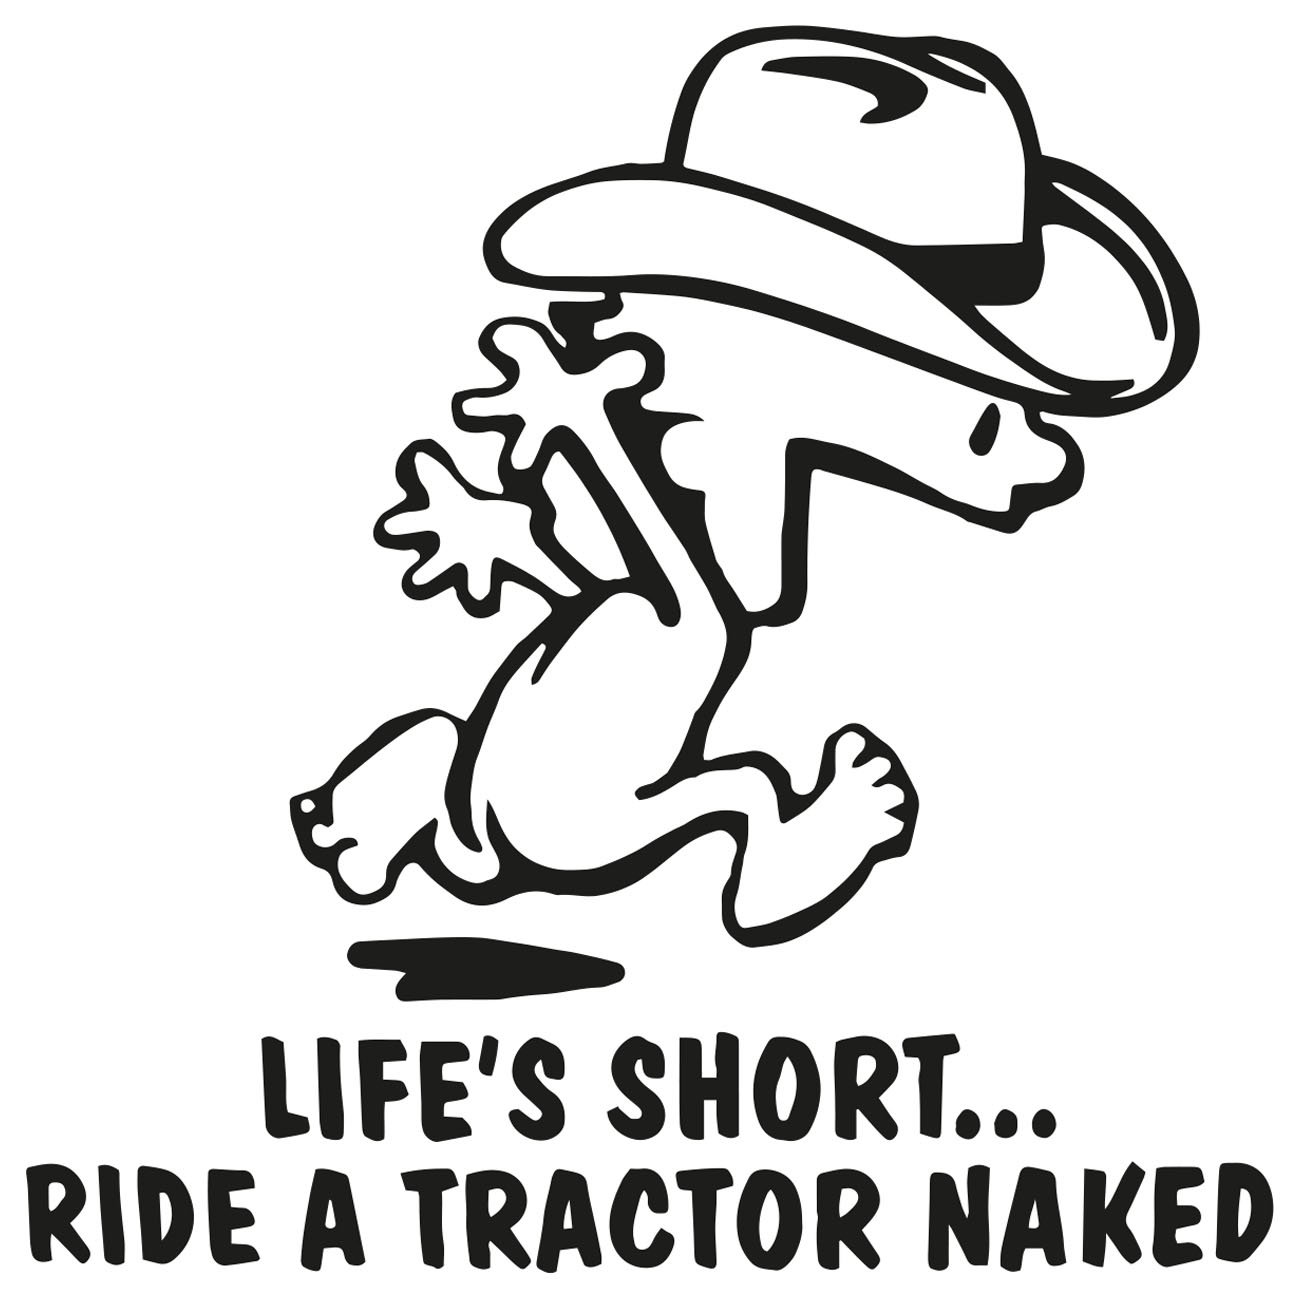 Lifes short ride a tractor naked